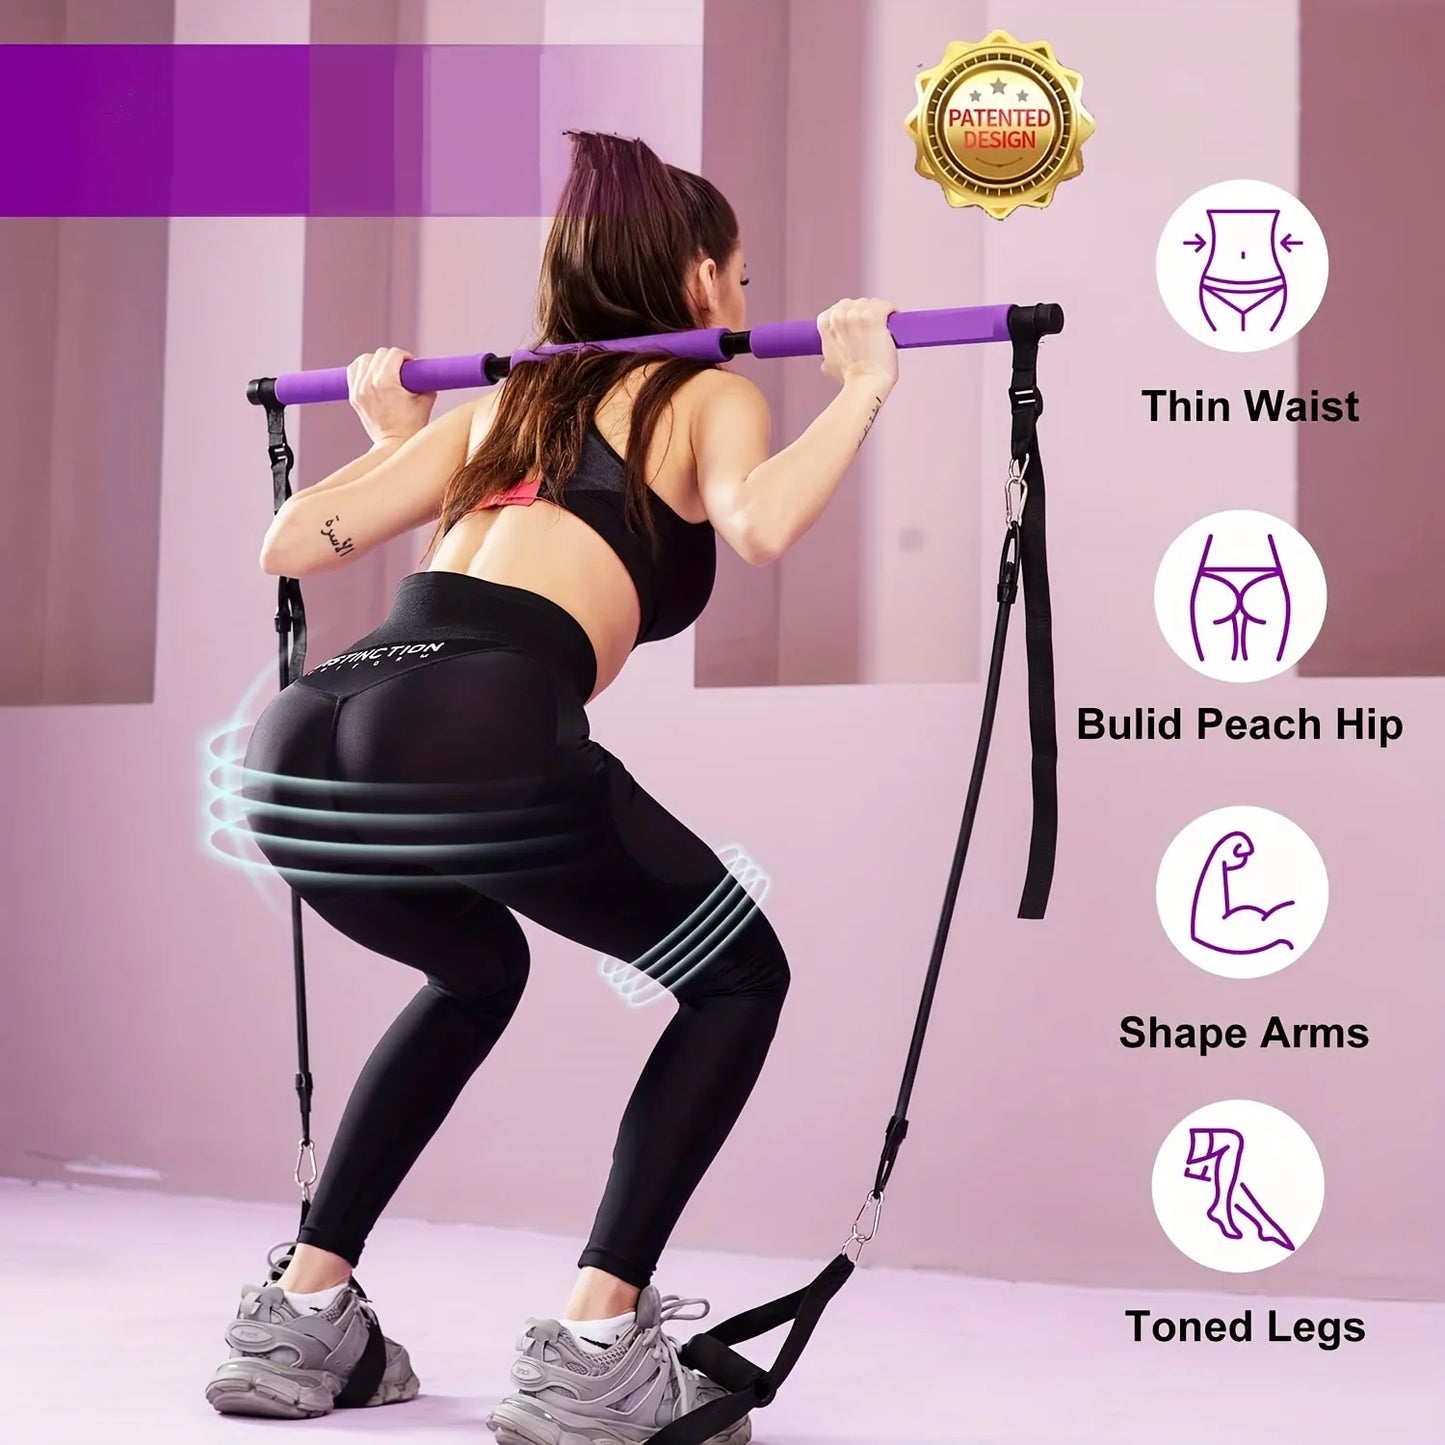 Pilates Bar Kit with Resistance Bands